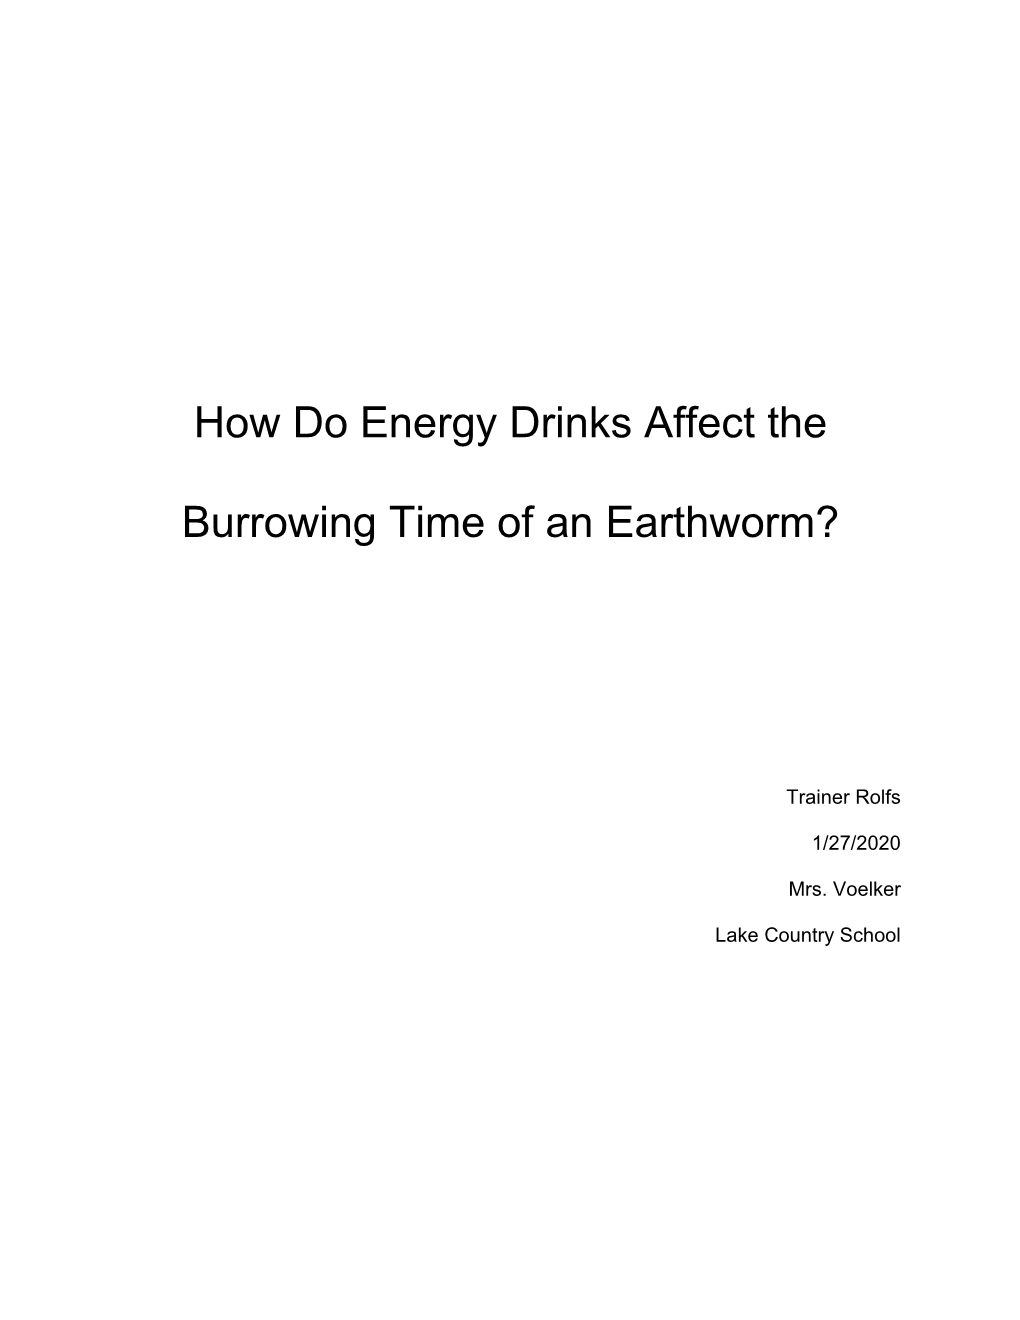 How Do Energy Drinks Affect the Burrowing Time of an Earthworm?